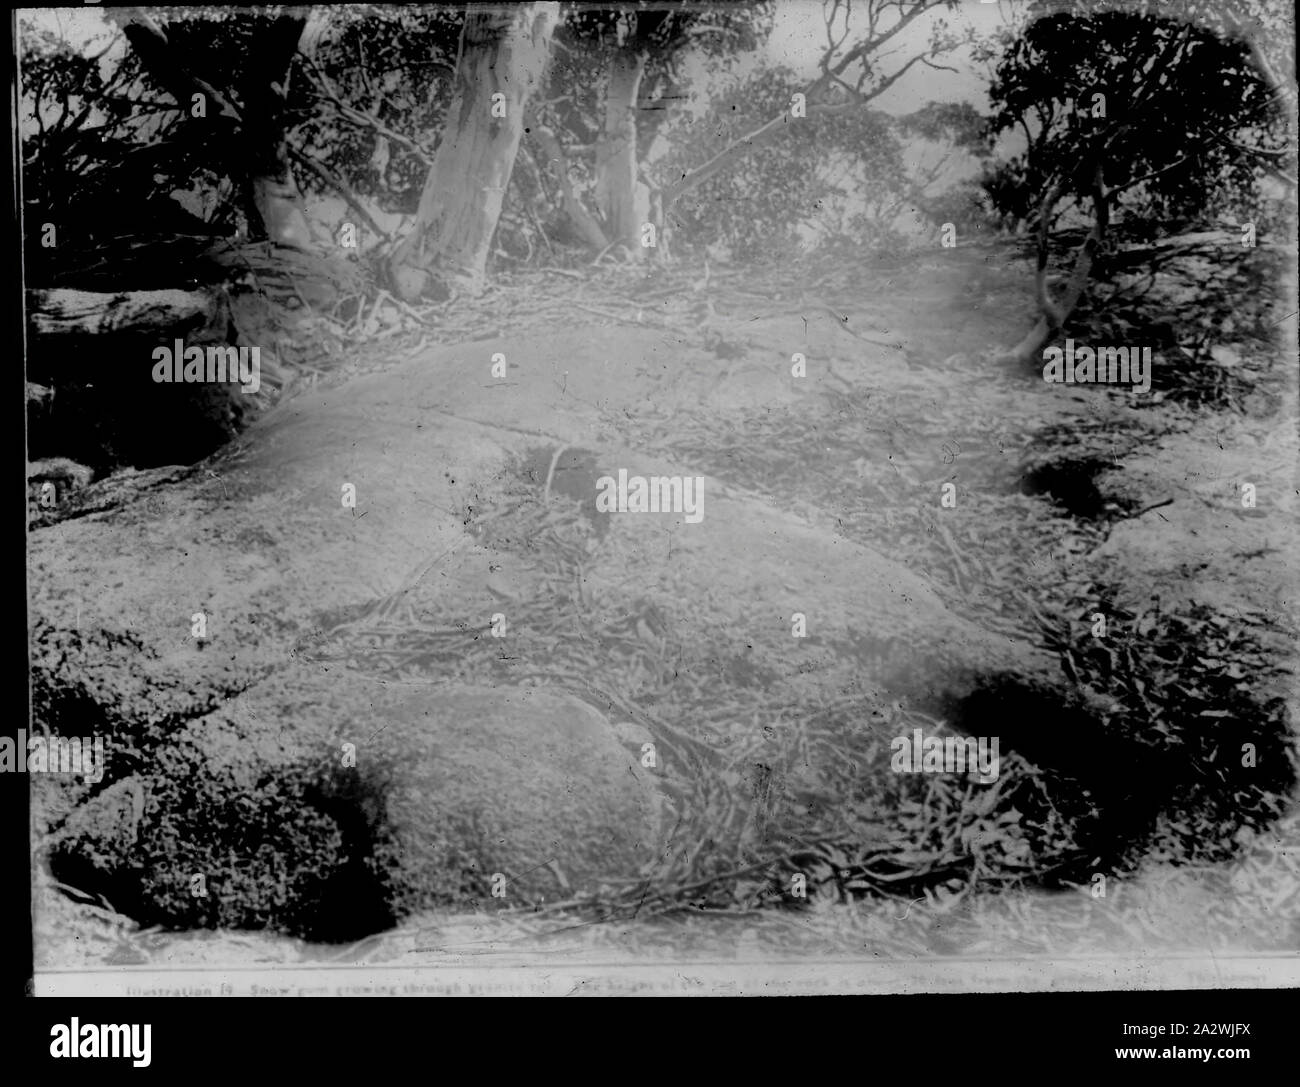 Lantern Slide - Snow Gums, Victoria, Australia, Date Unknown, Black and white image of a newspaper article showing snow gums growing through granite rock, possibly used to illustrate a public lecture given by a Campbell on the natural vegetation of the Victorian high country. This is one of many glass lantern slides that form the A.J. Campbell Collection held by Museums Victoria Stock Photo